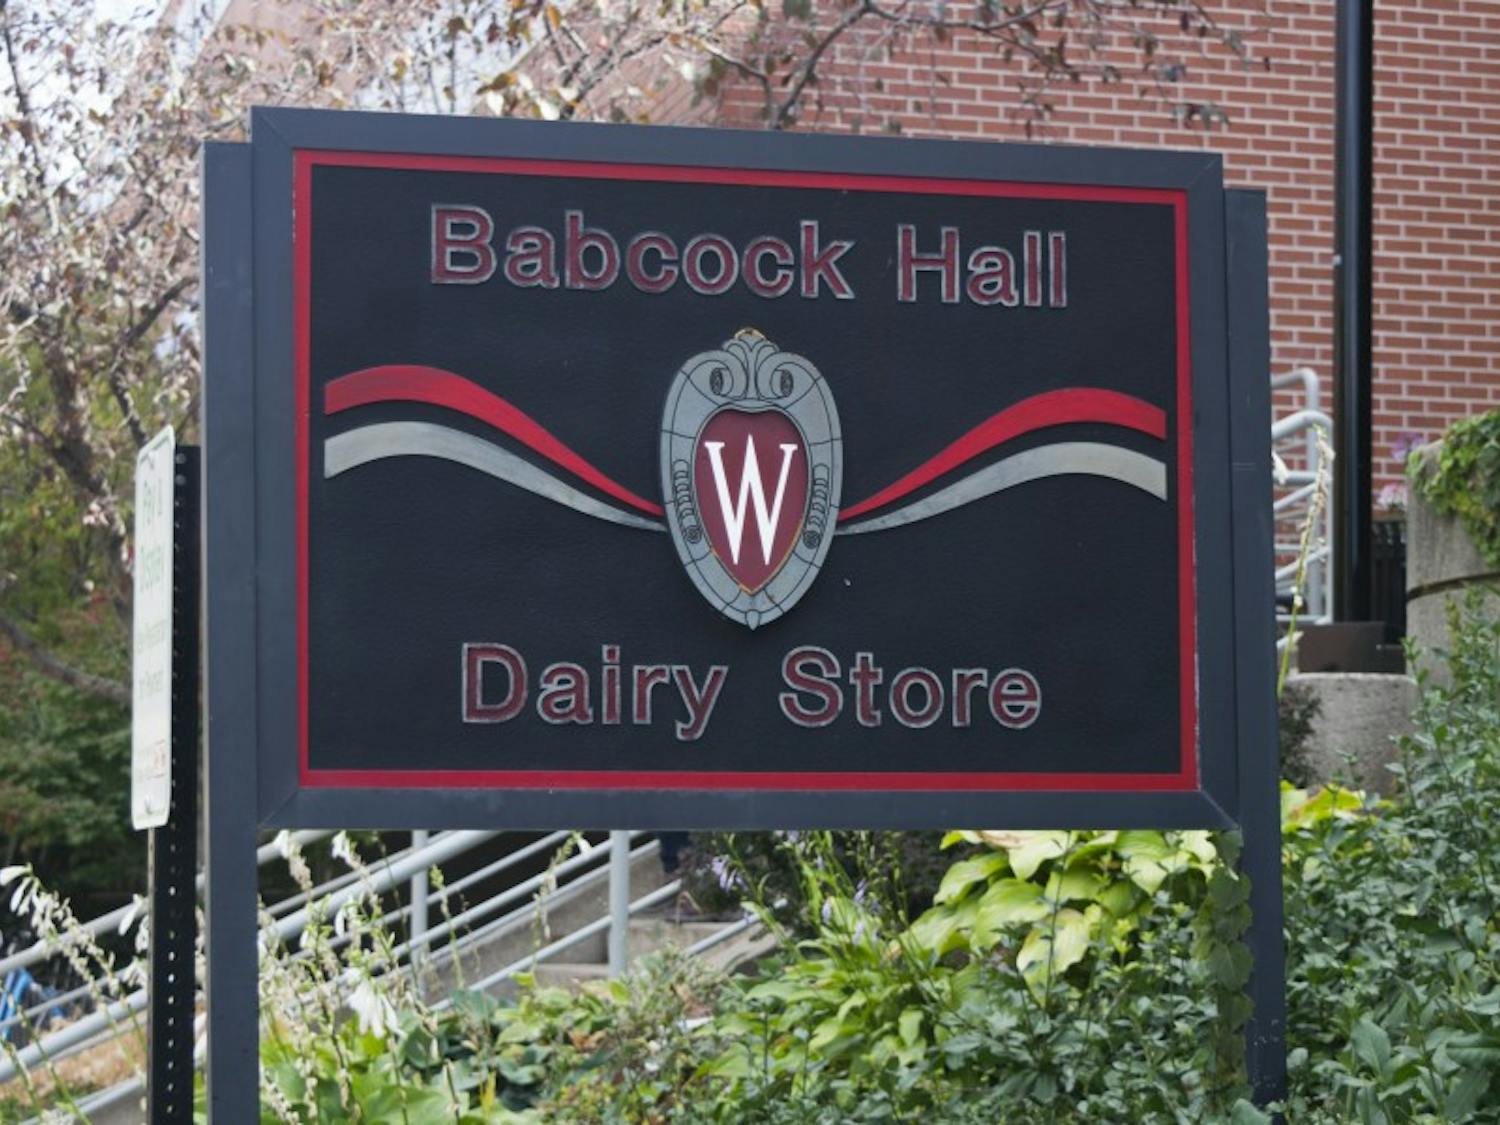 After more than 50 years, Babcock Dairy Hall will see modernization.